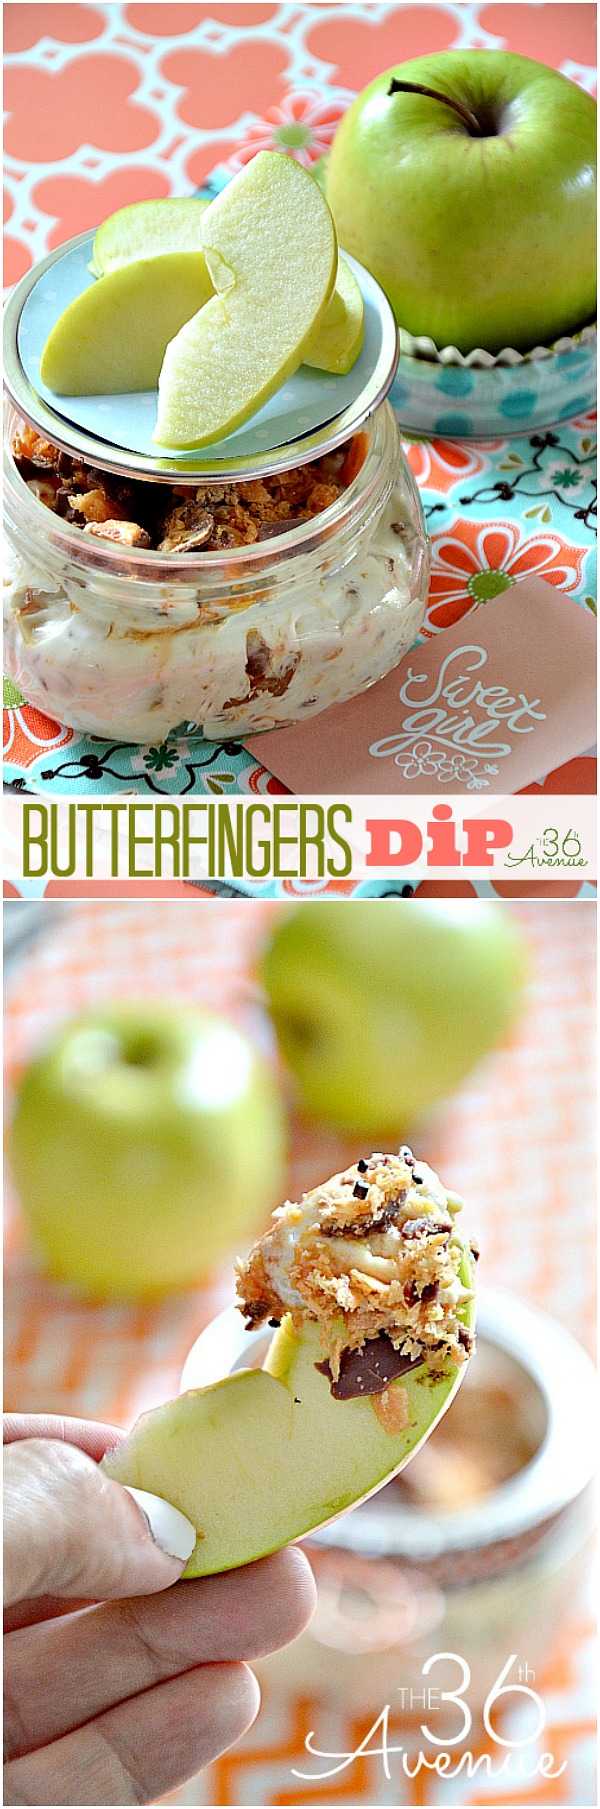 Delicious Butterfingers Dip Recipe at the36thavenue.com